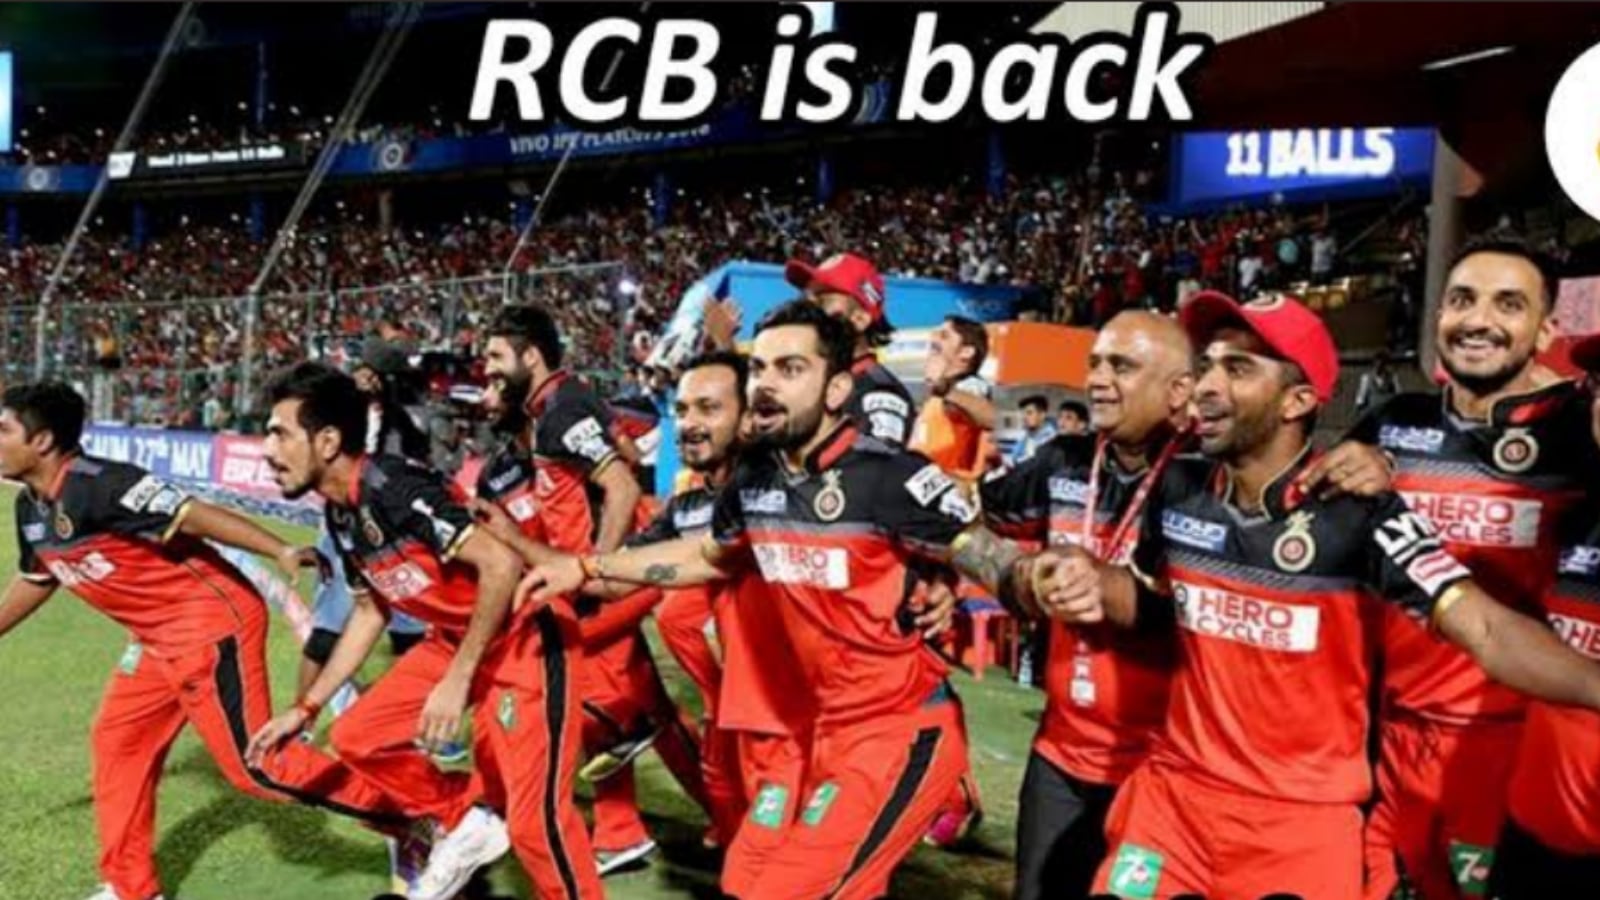 Vintage RCB': Royal Challengers Bangalore Trolled With Memes After Defeat  in IPL 2022 Opener